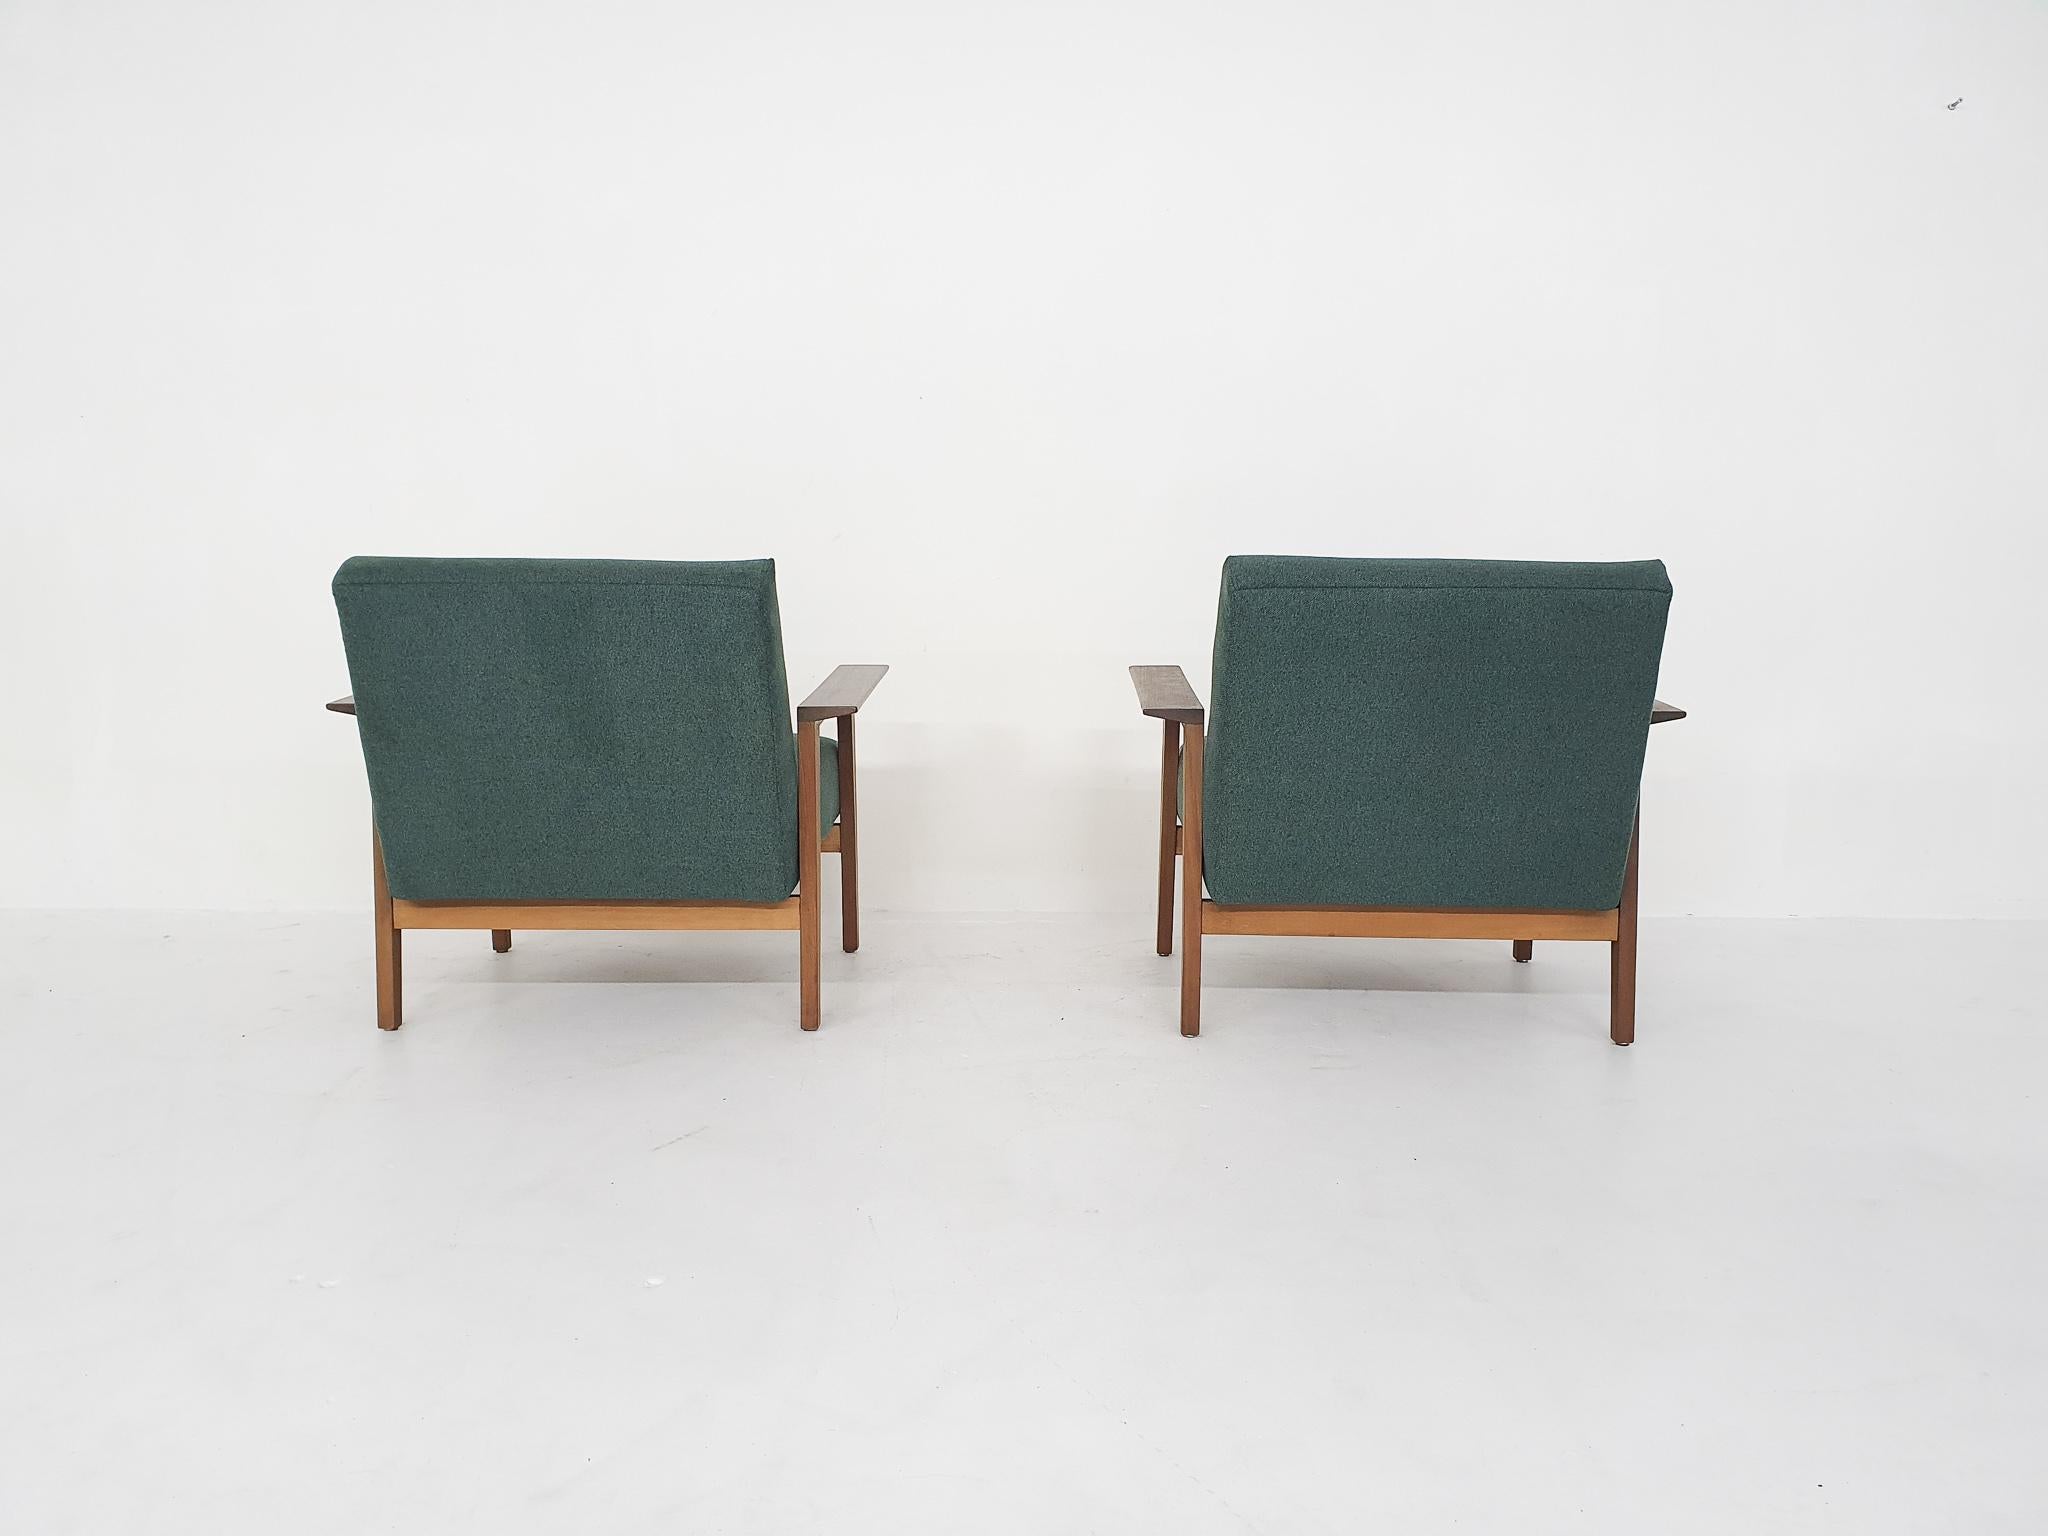 Mid-20th Century Scandinavian Modern Teak Arm Chairs with New Green Upholstery, 1960's